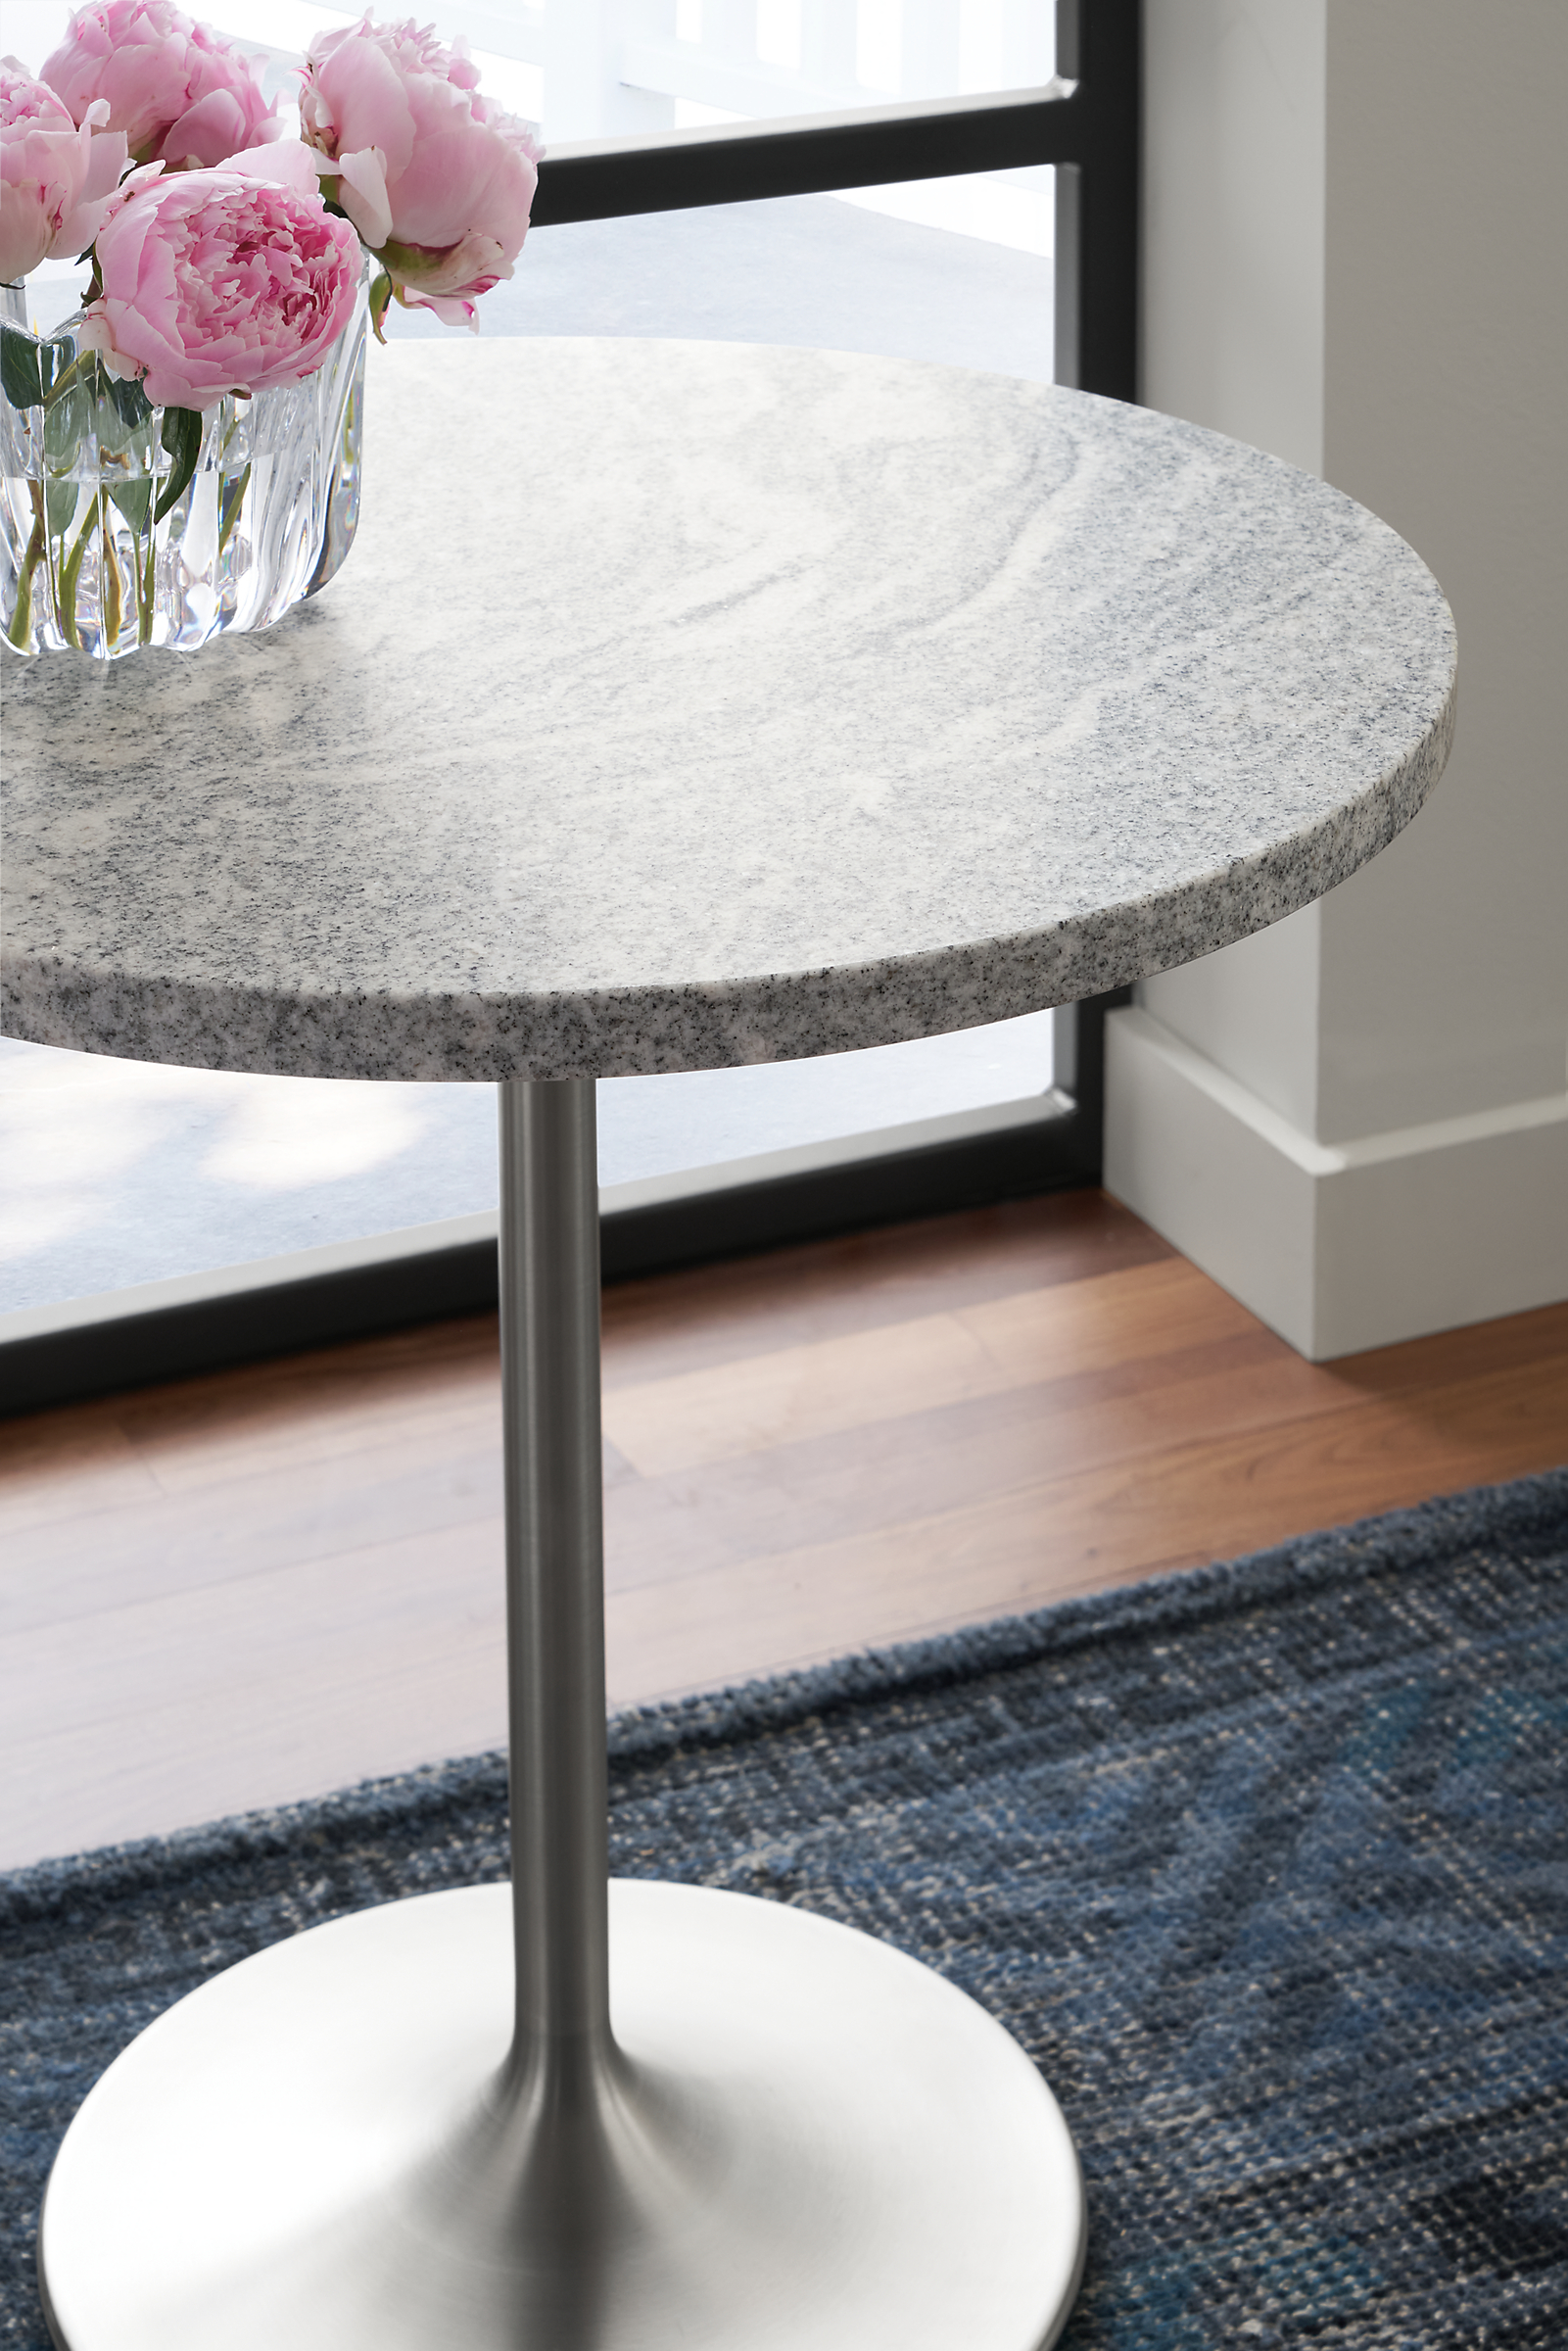 Aria 22-Round End Table with Amira Rug in Indigo.